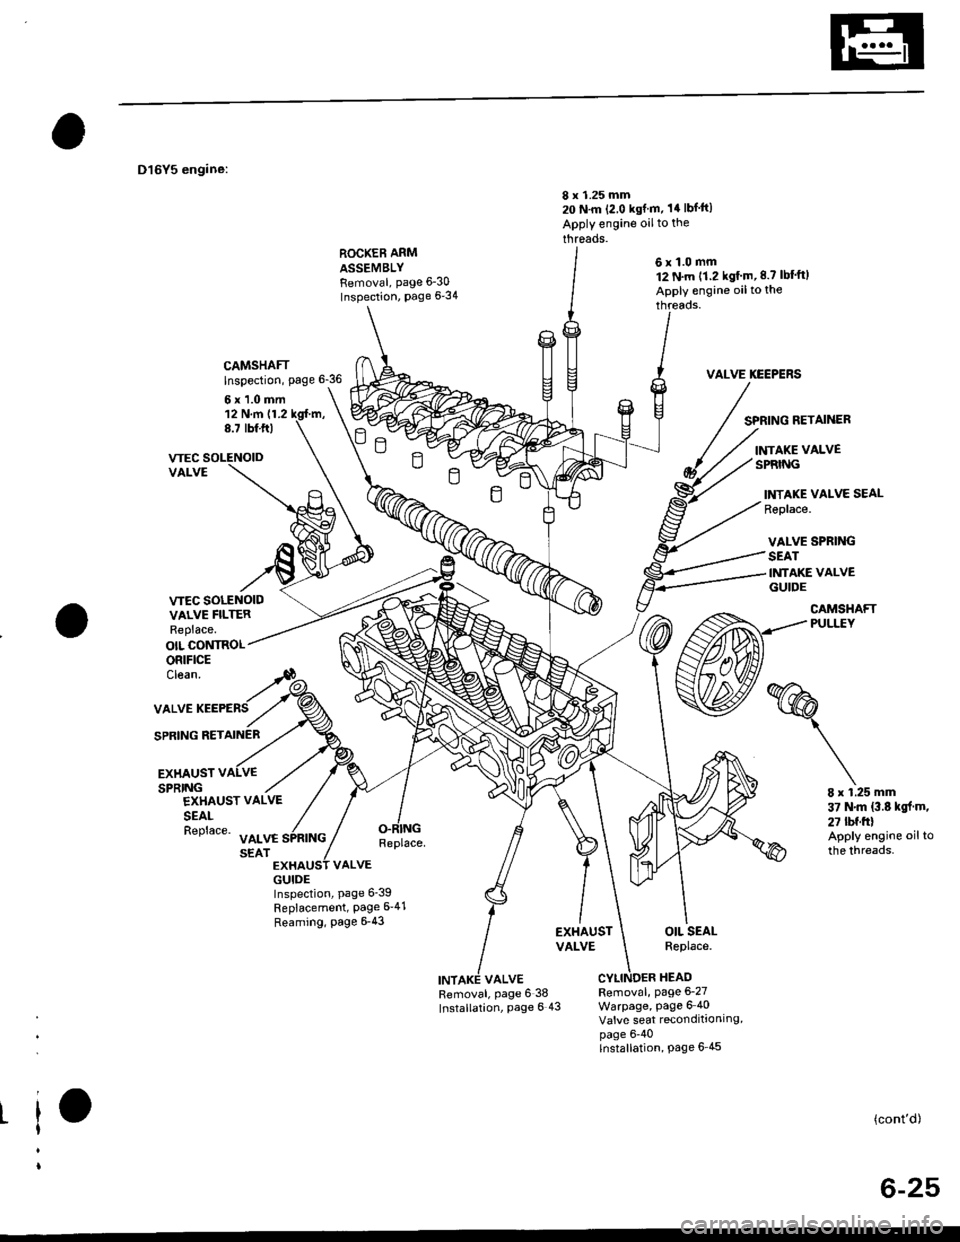 HONDA CIVIC 1997 6.G Manual PDF D16Y5 engine:
I x 1.25 mm20 N.m (2,0 kgf m, 14 lbf ft)
Apply engine oilto the
threads.ROCKEB ARMASSEMBLYFemoval, page 6-30
Inspection, Page 6-34
6x1.0mm12 N.m 11.2 kgf m, 8.7 lbfftl
Apply engine oilt